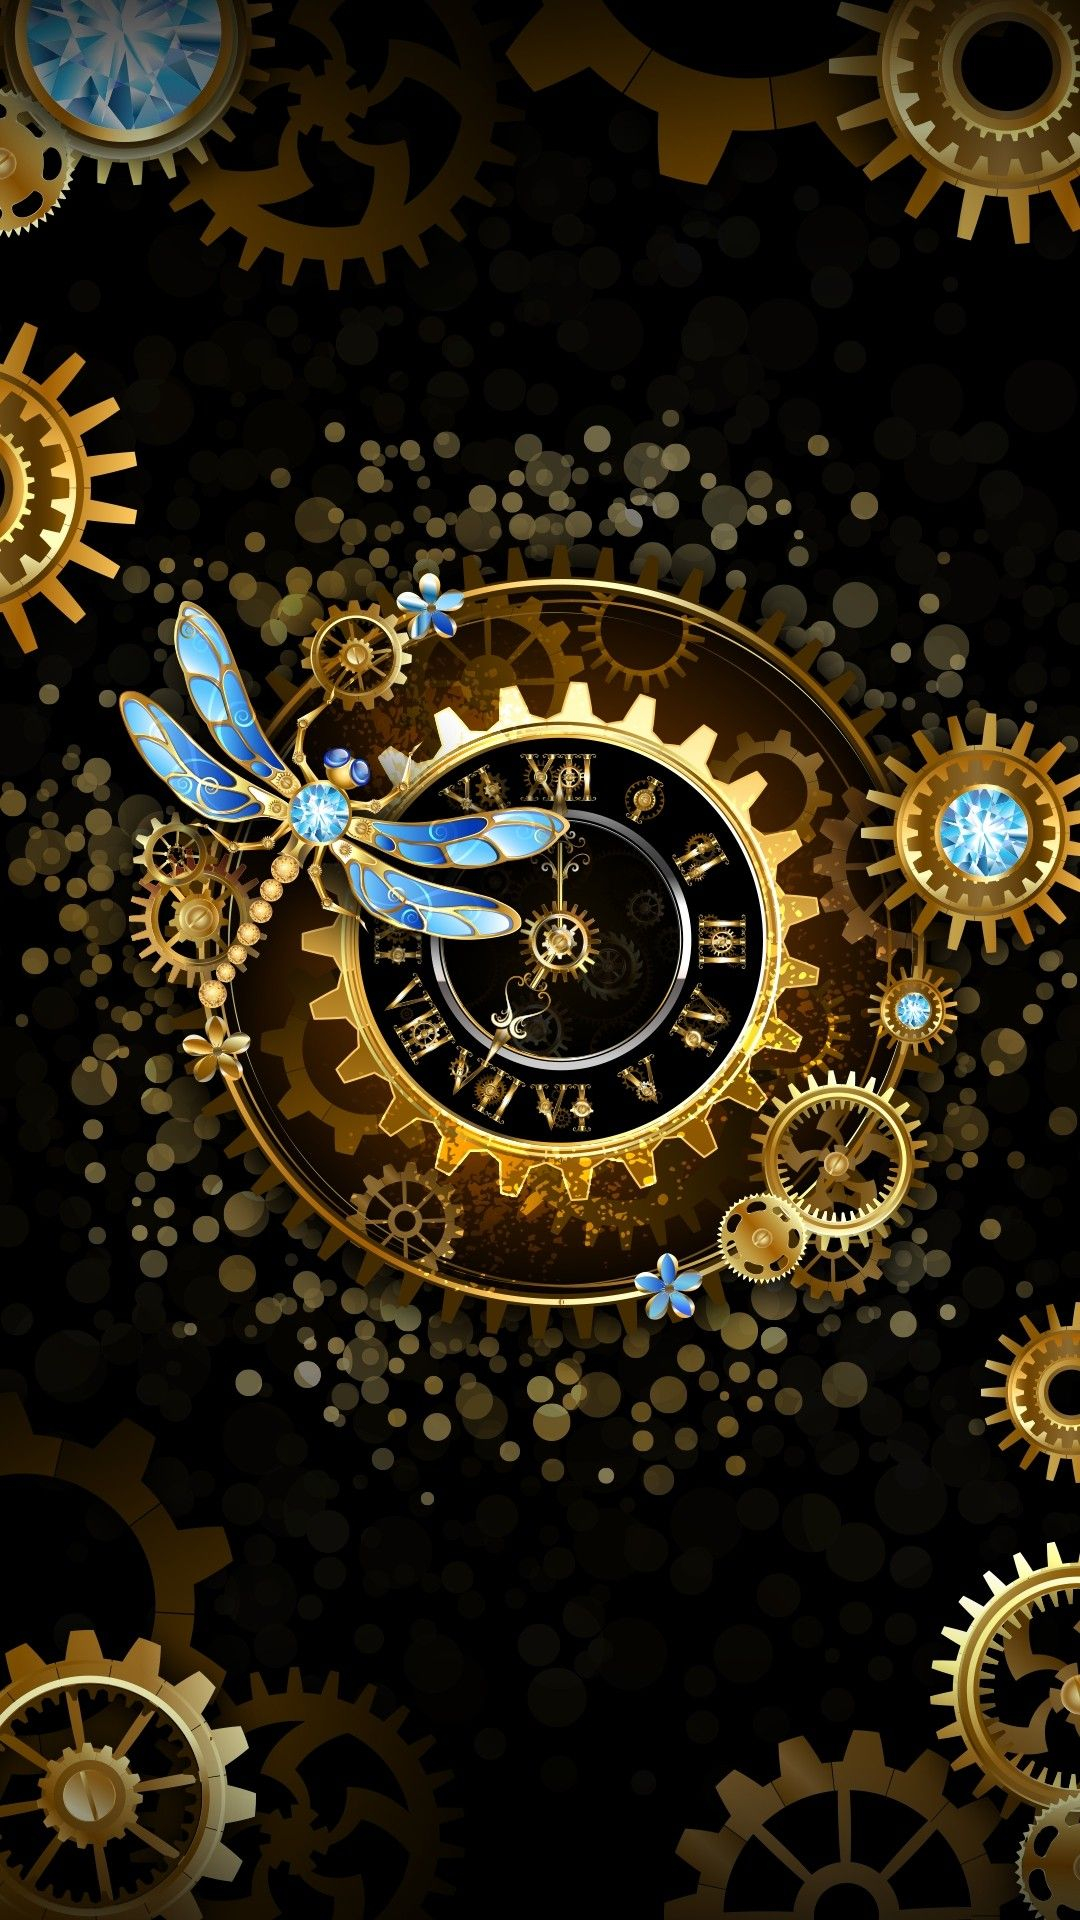 1080x1920 Pin by NicoleMaree77 on Wallpaper Sets 8 | Steampunk wallpaper, Clock wallpaper, Gothic wallpaper